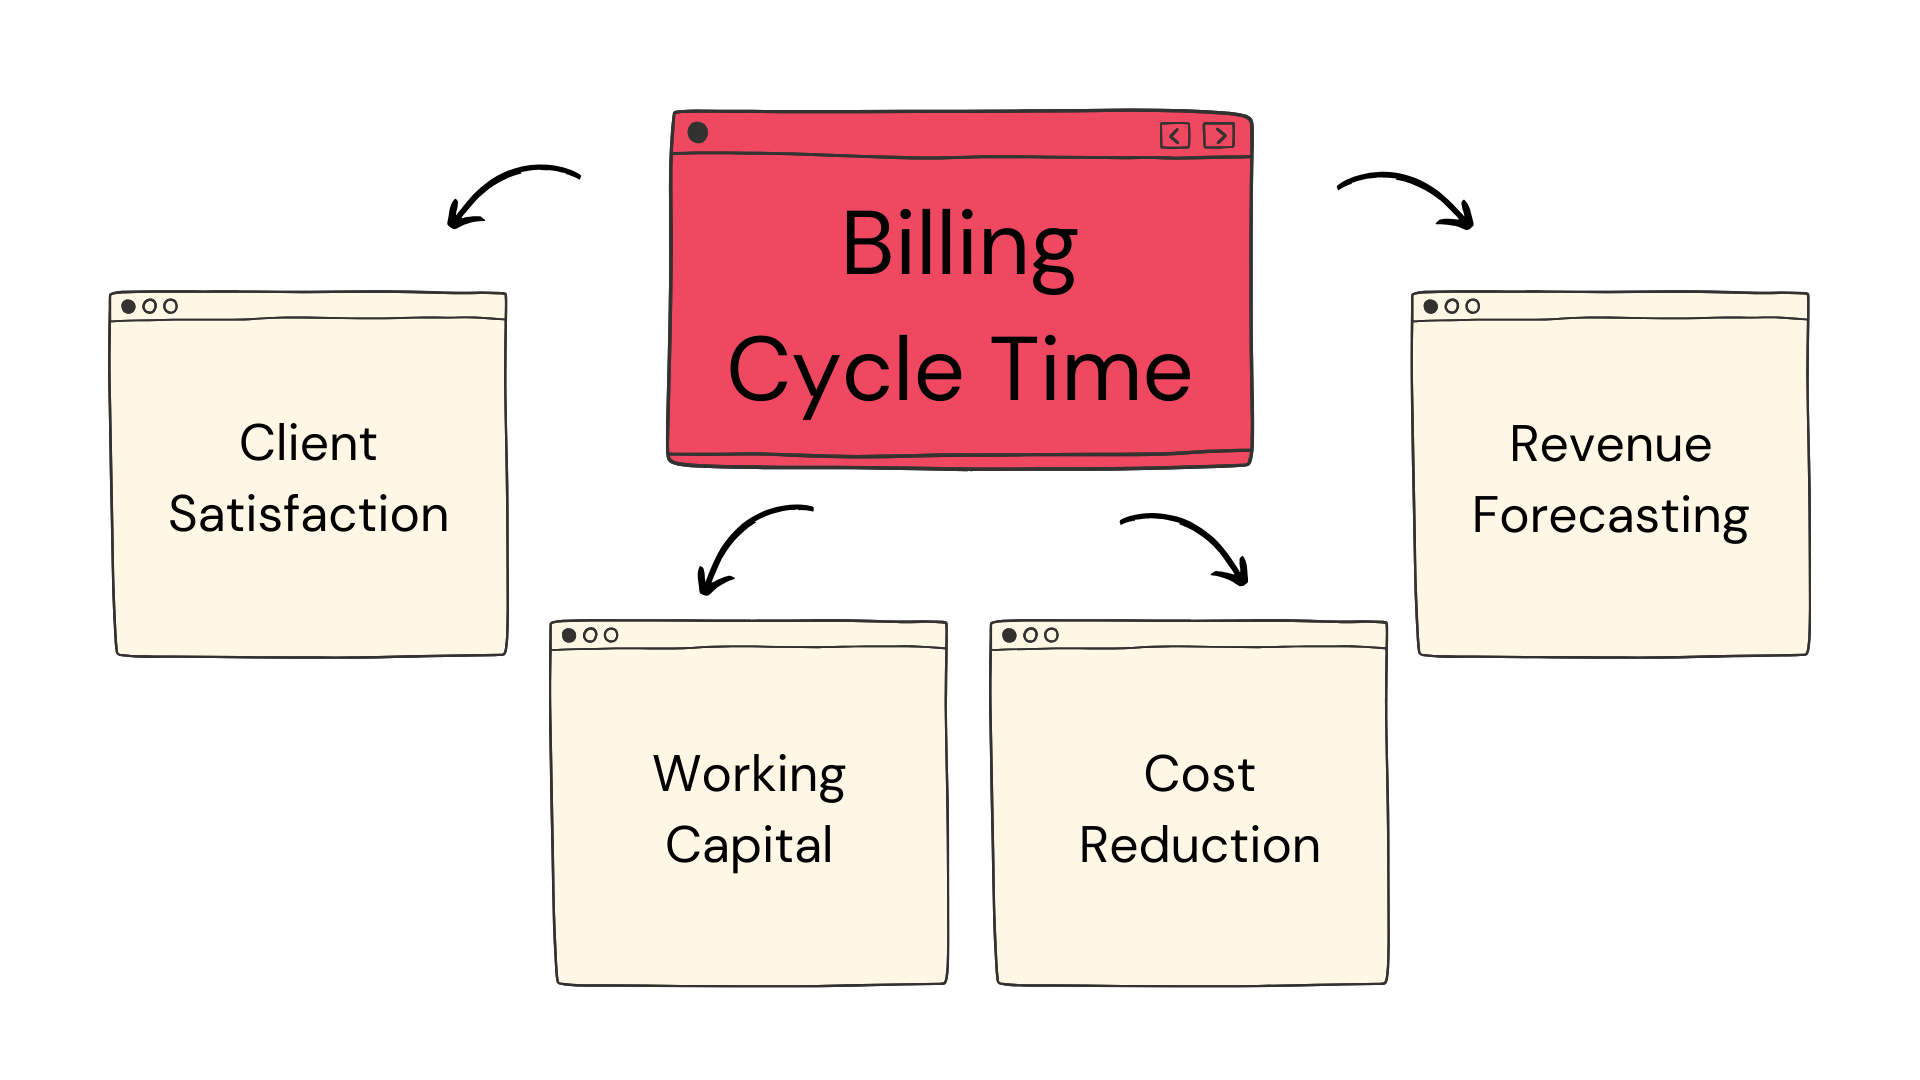 Billing Cycle Time